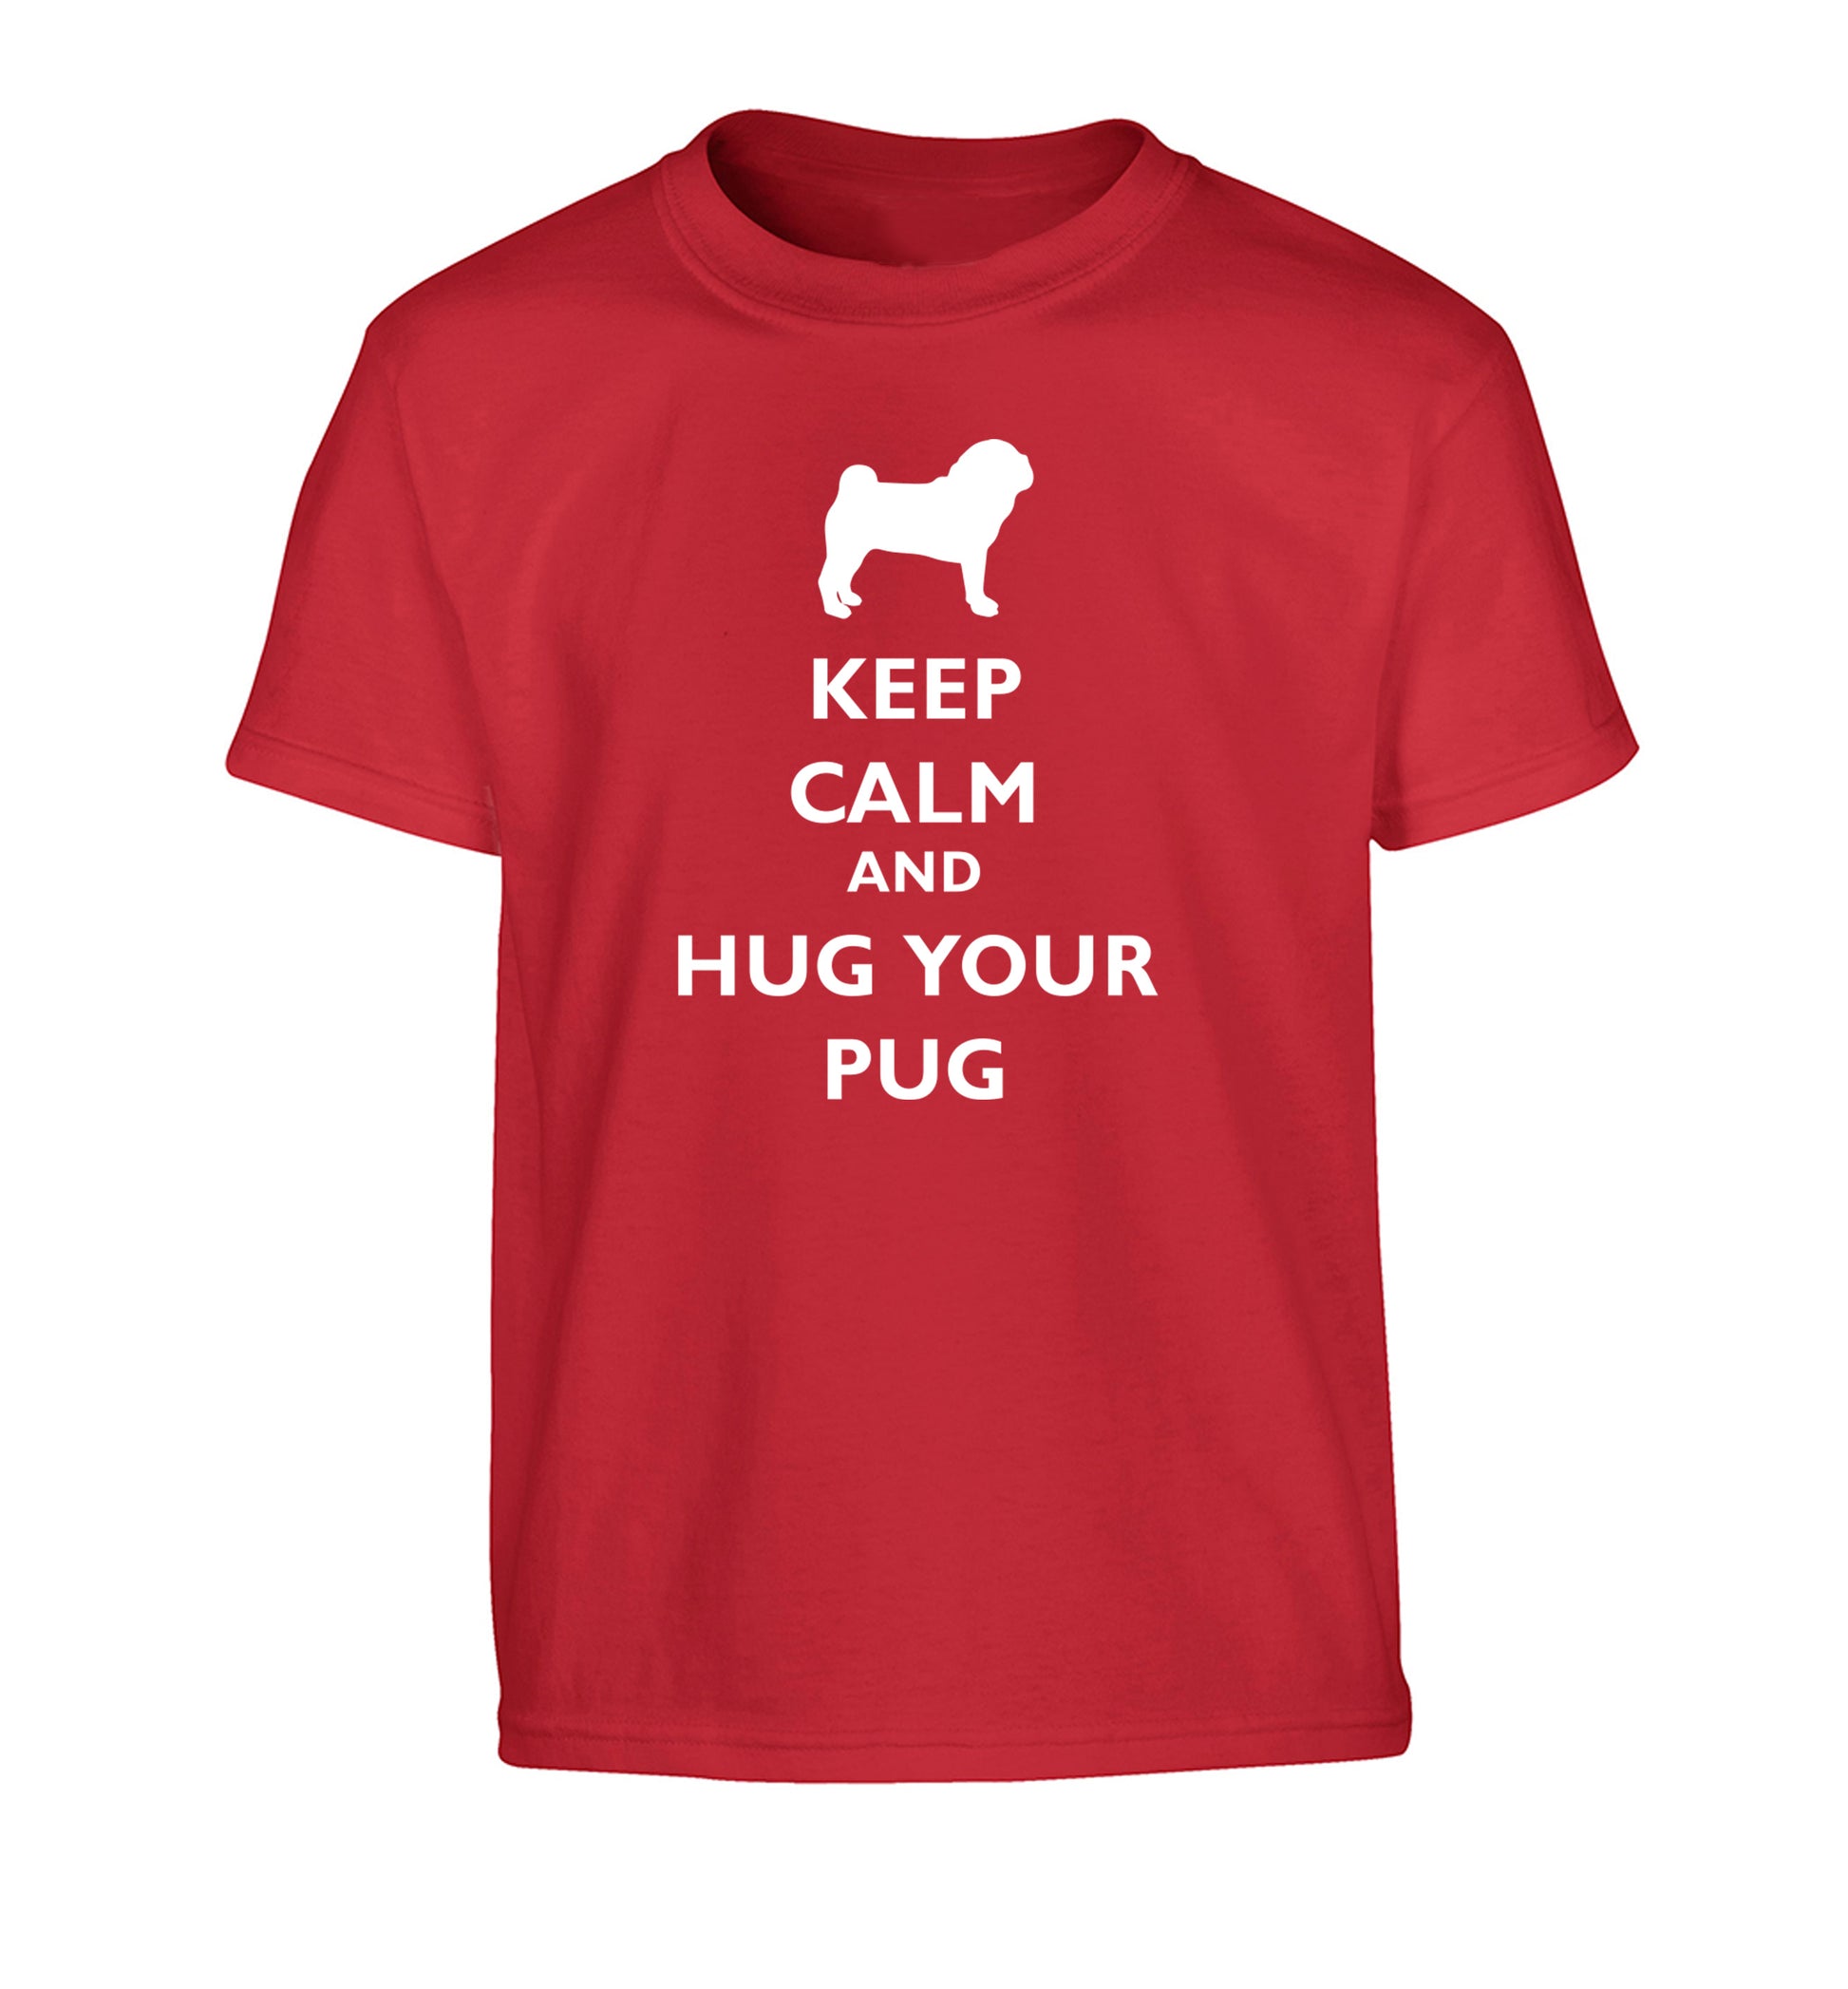 Keep calm and hug your pug Children's red Tshirt 12-13 Years